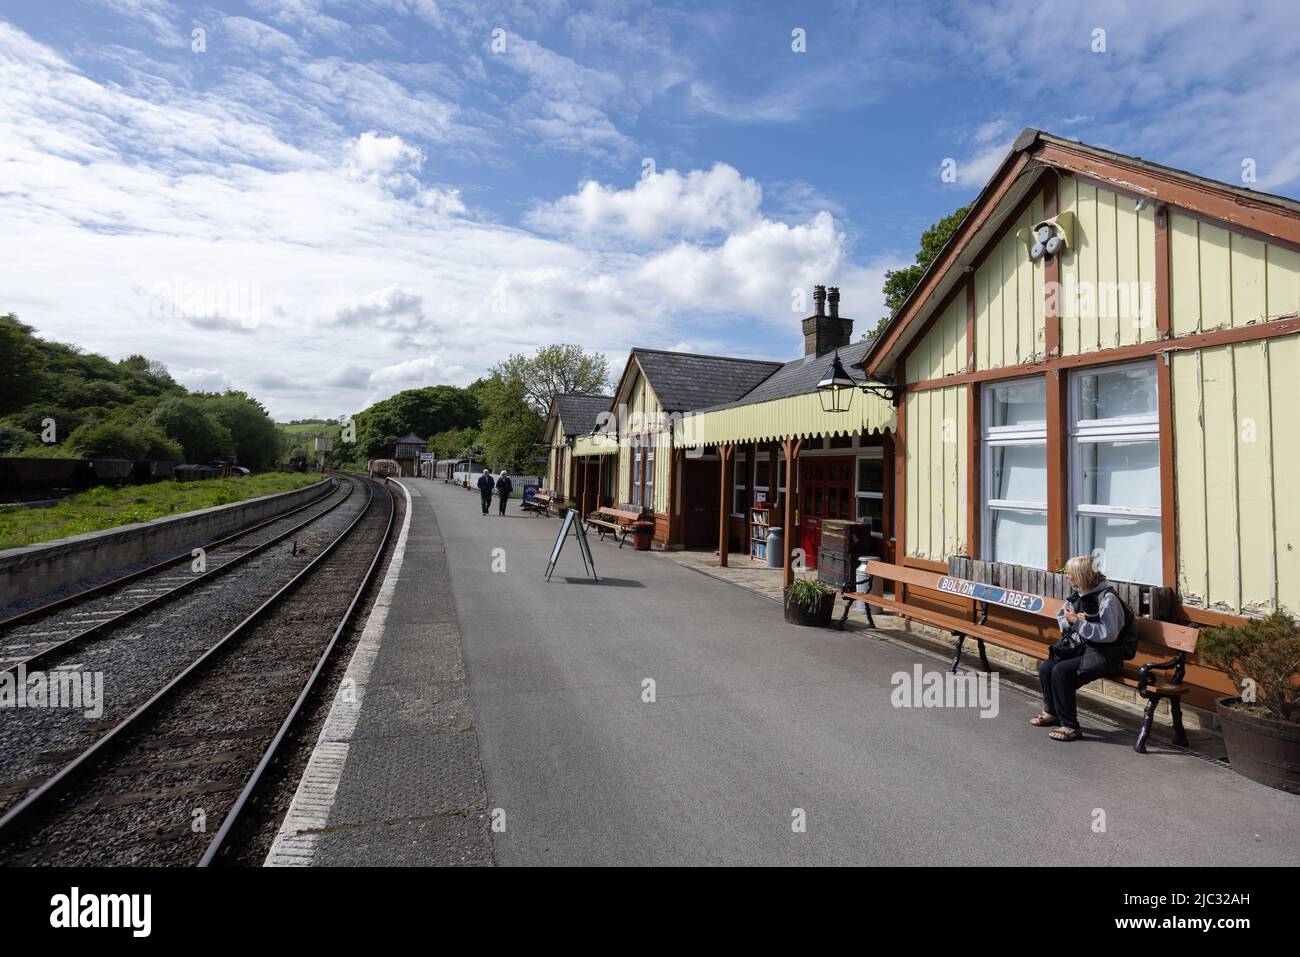 Woman sitting on bench and people walking on platform between colourful yellow wooden train station building and rails at Bolton Abbey railway station Stock Photo